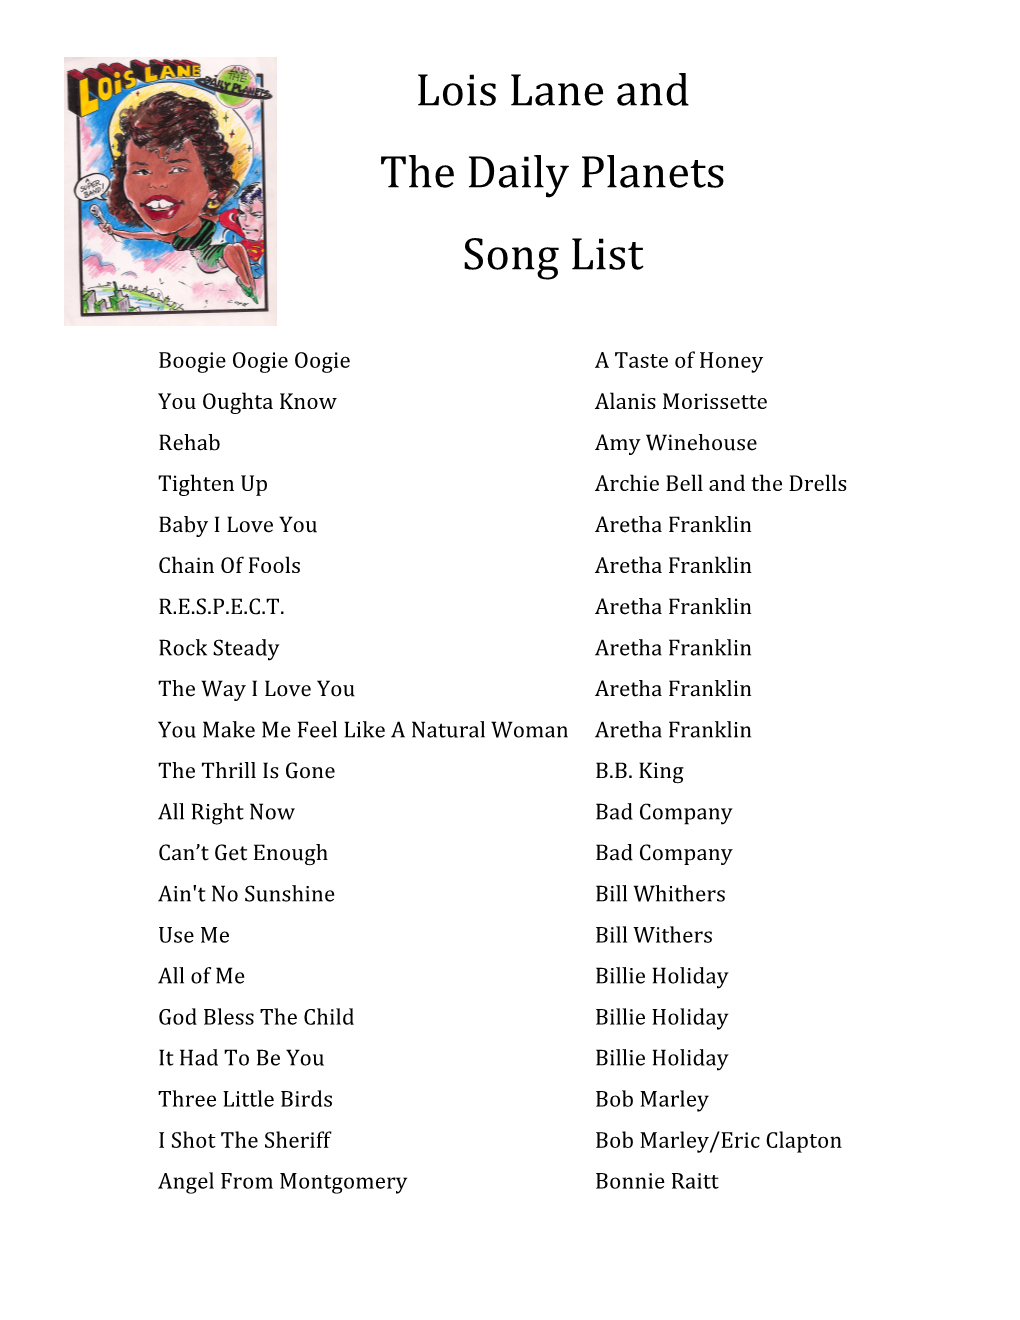 Lois Lane and the Daily Planets Song List